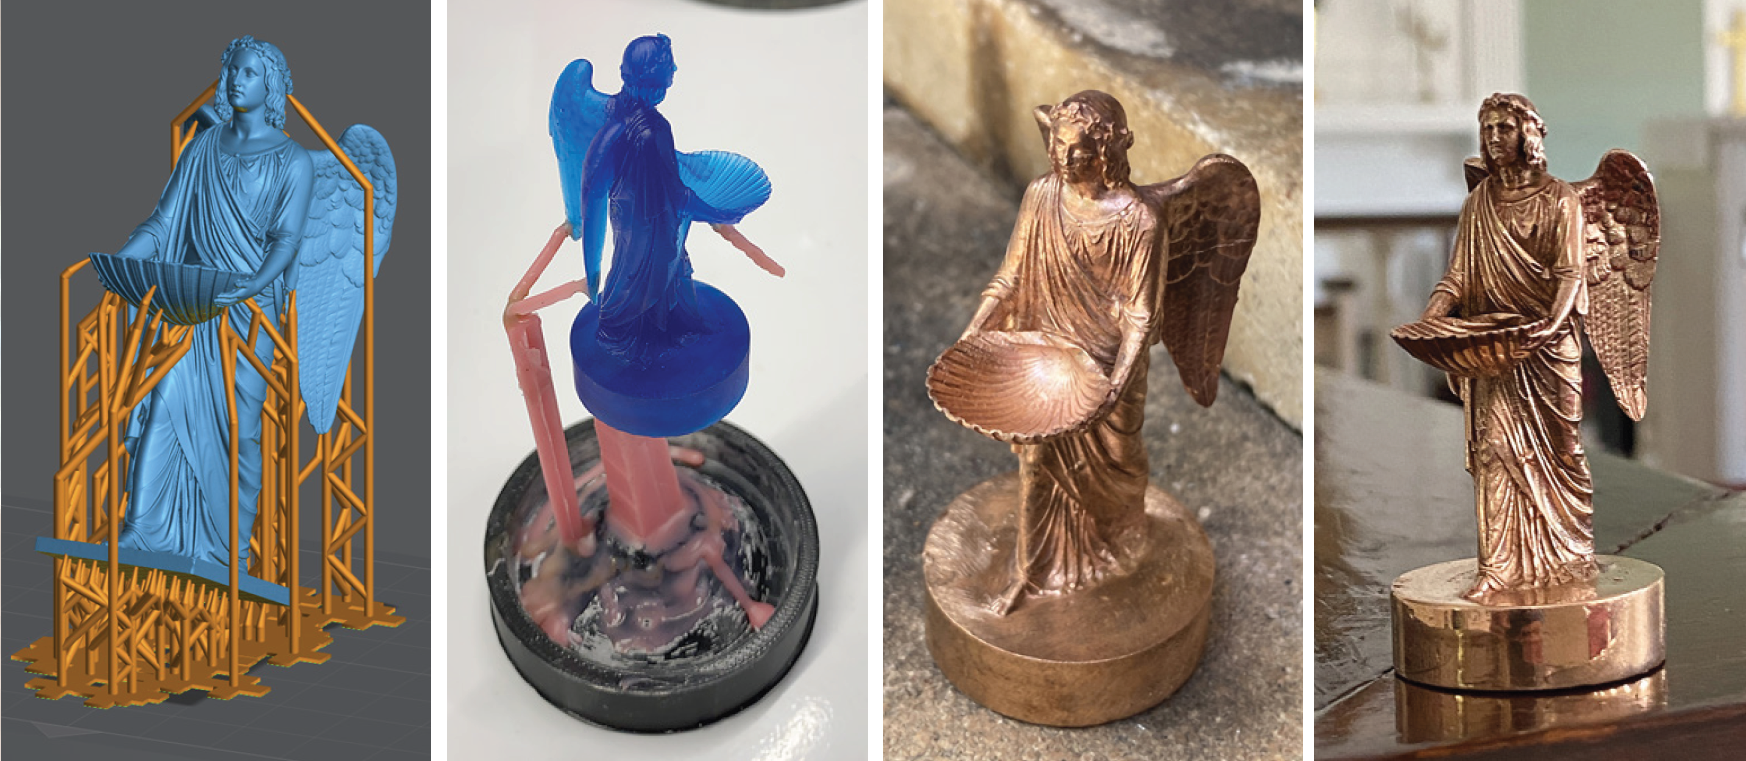 Baptismal Angel from printing to casting